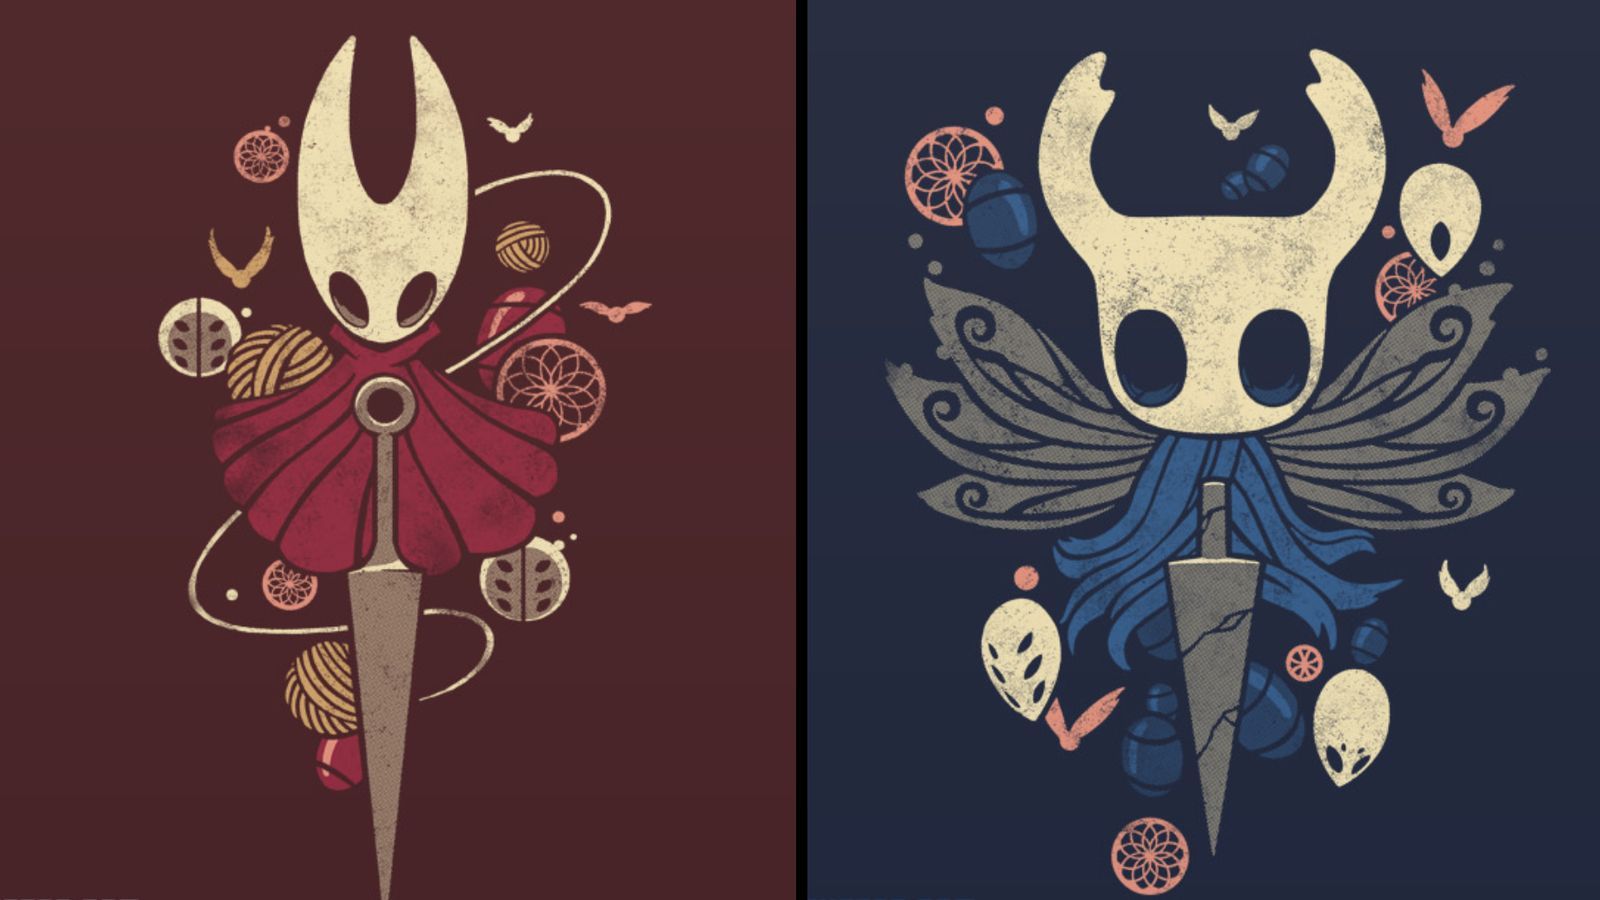 Hollow Knight and Hornet Art in Knight Hollow night